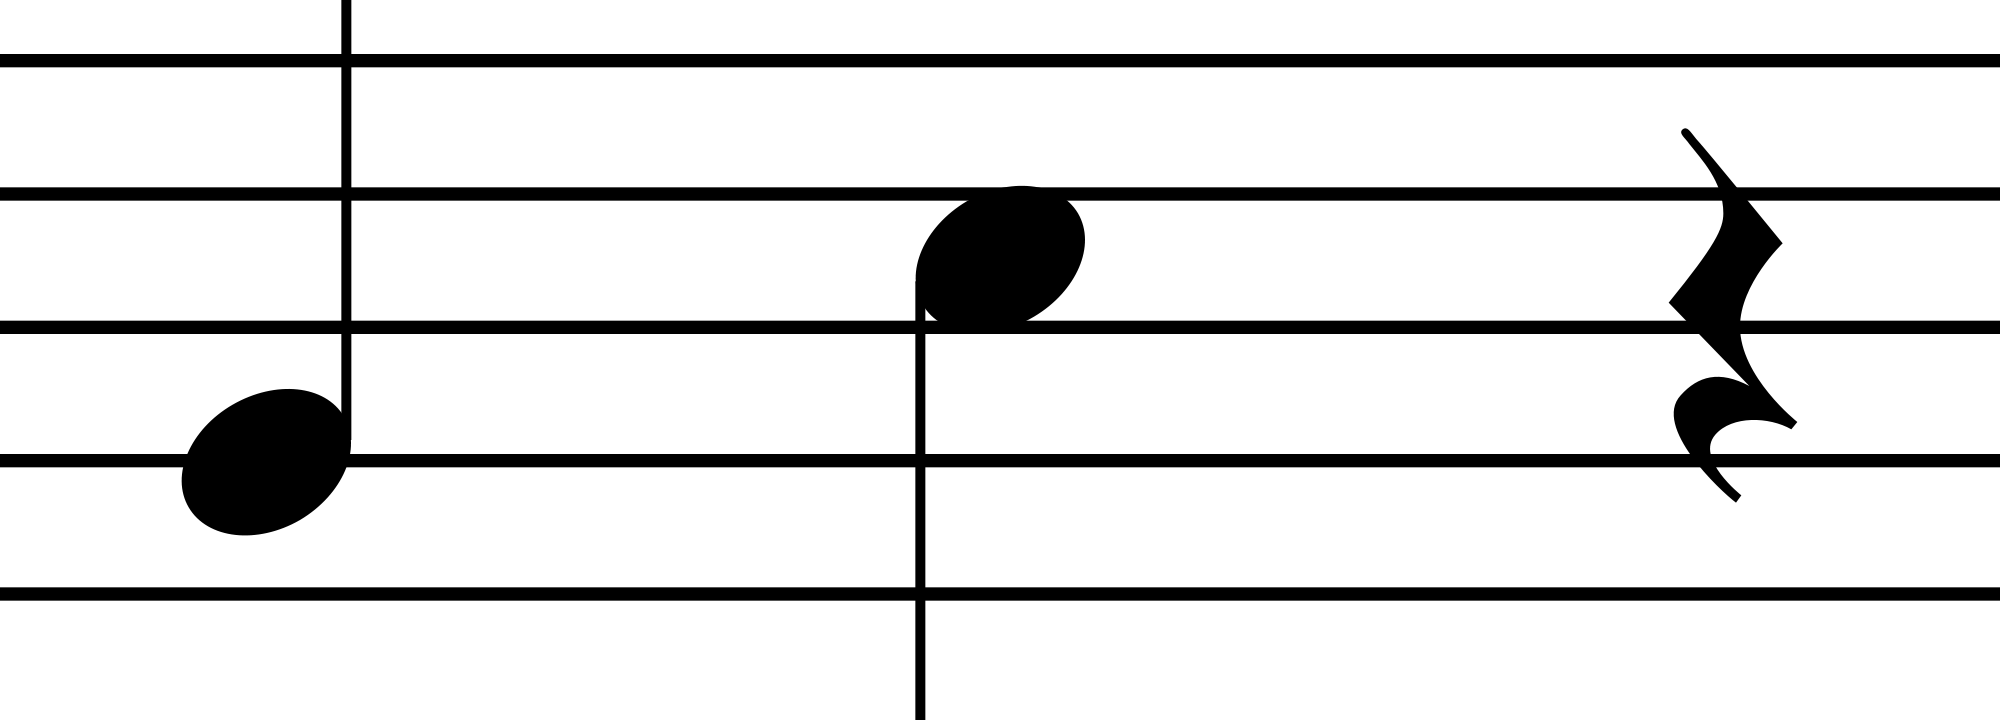 File:Quarter notes and rest.svg - Wikimedia Commons